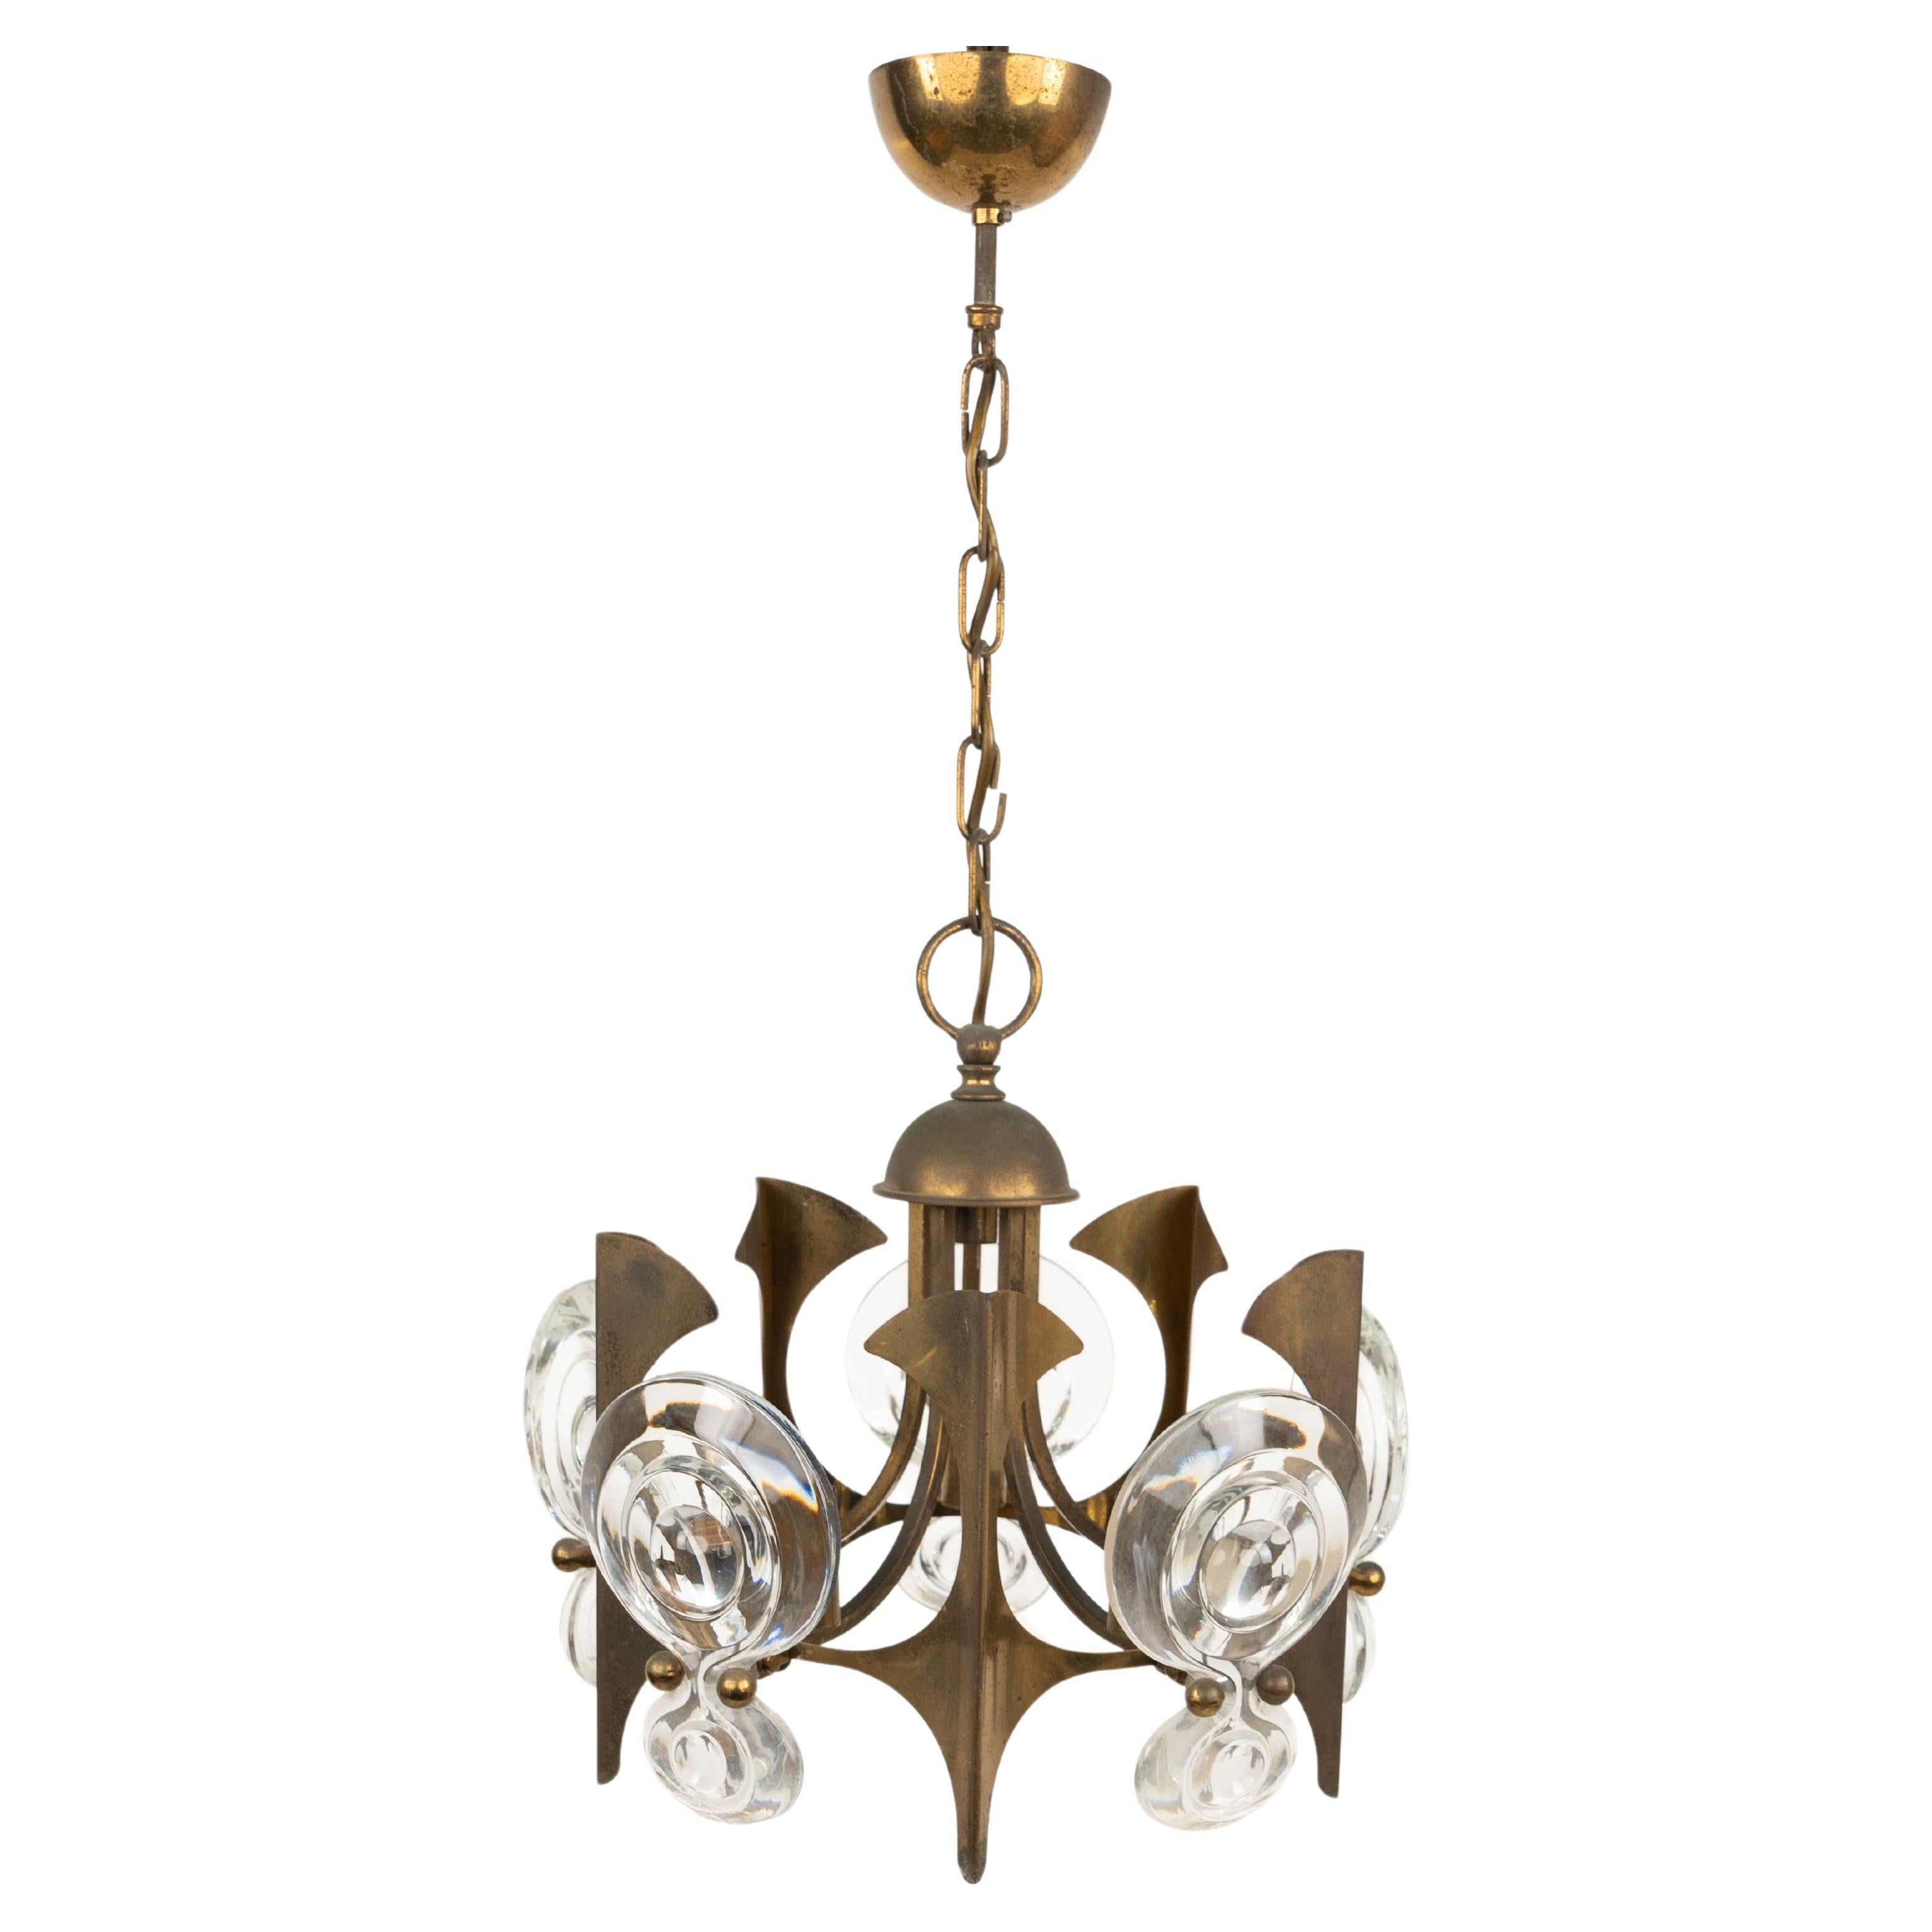 Midcentury Chandelier Brass and Glass by Oscar Torlasco, Italy 1960s For Sale